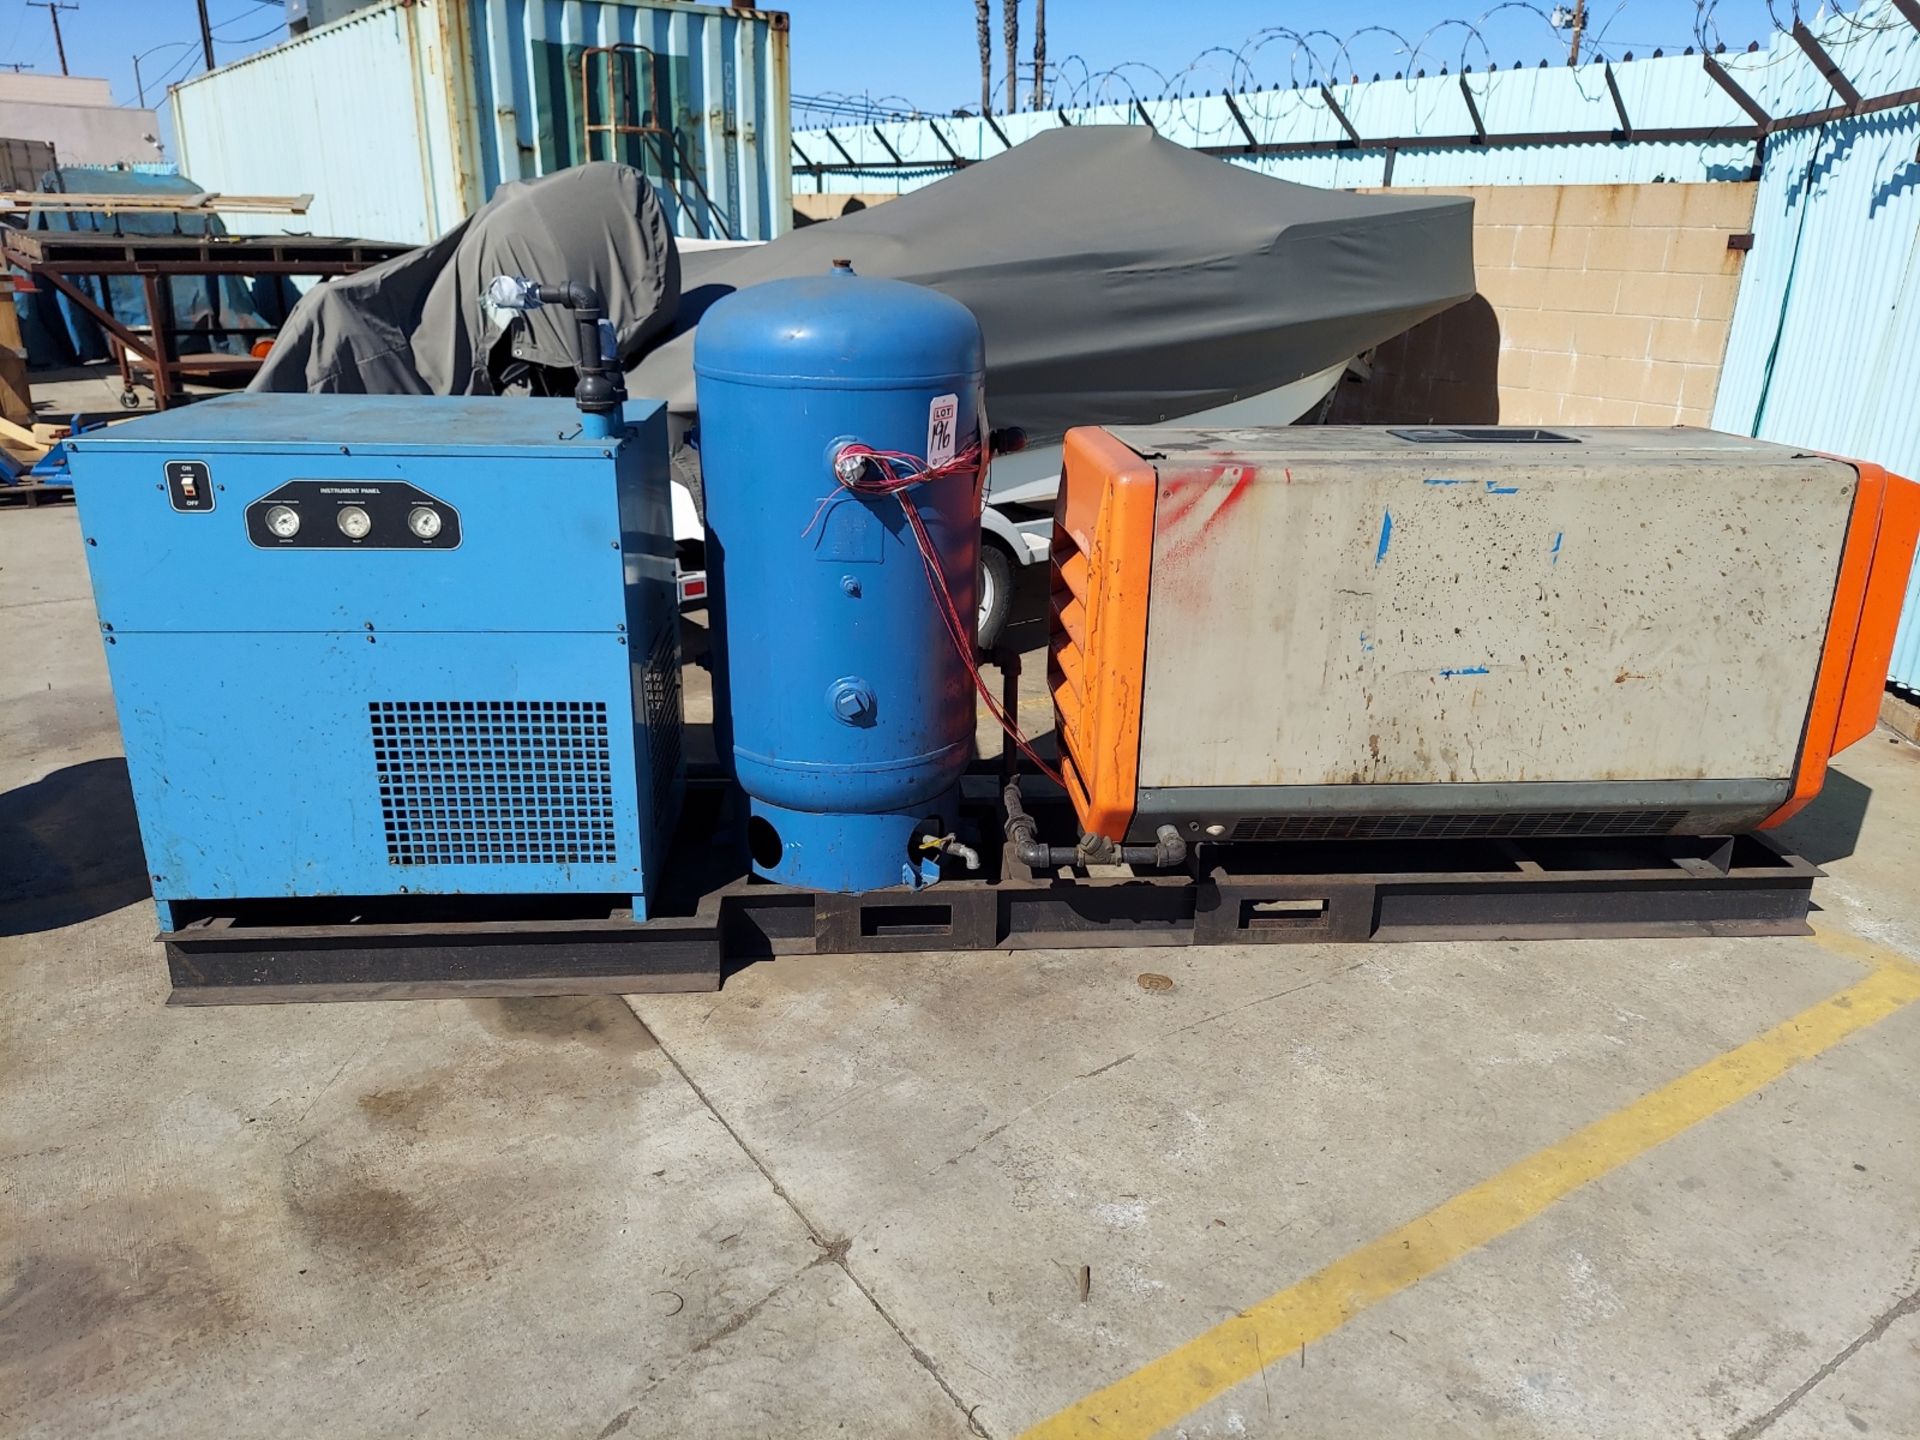 MATTEI SCREW TYPE AIR COMPRESSOR, ARROW AIR DRYER, RECEIVING TANK, SKID MOUNTED FOR TRAVEL - Image 2 of 14